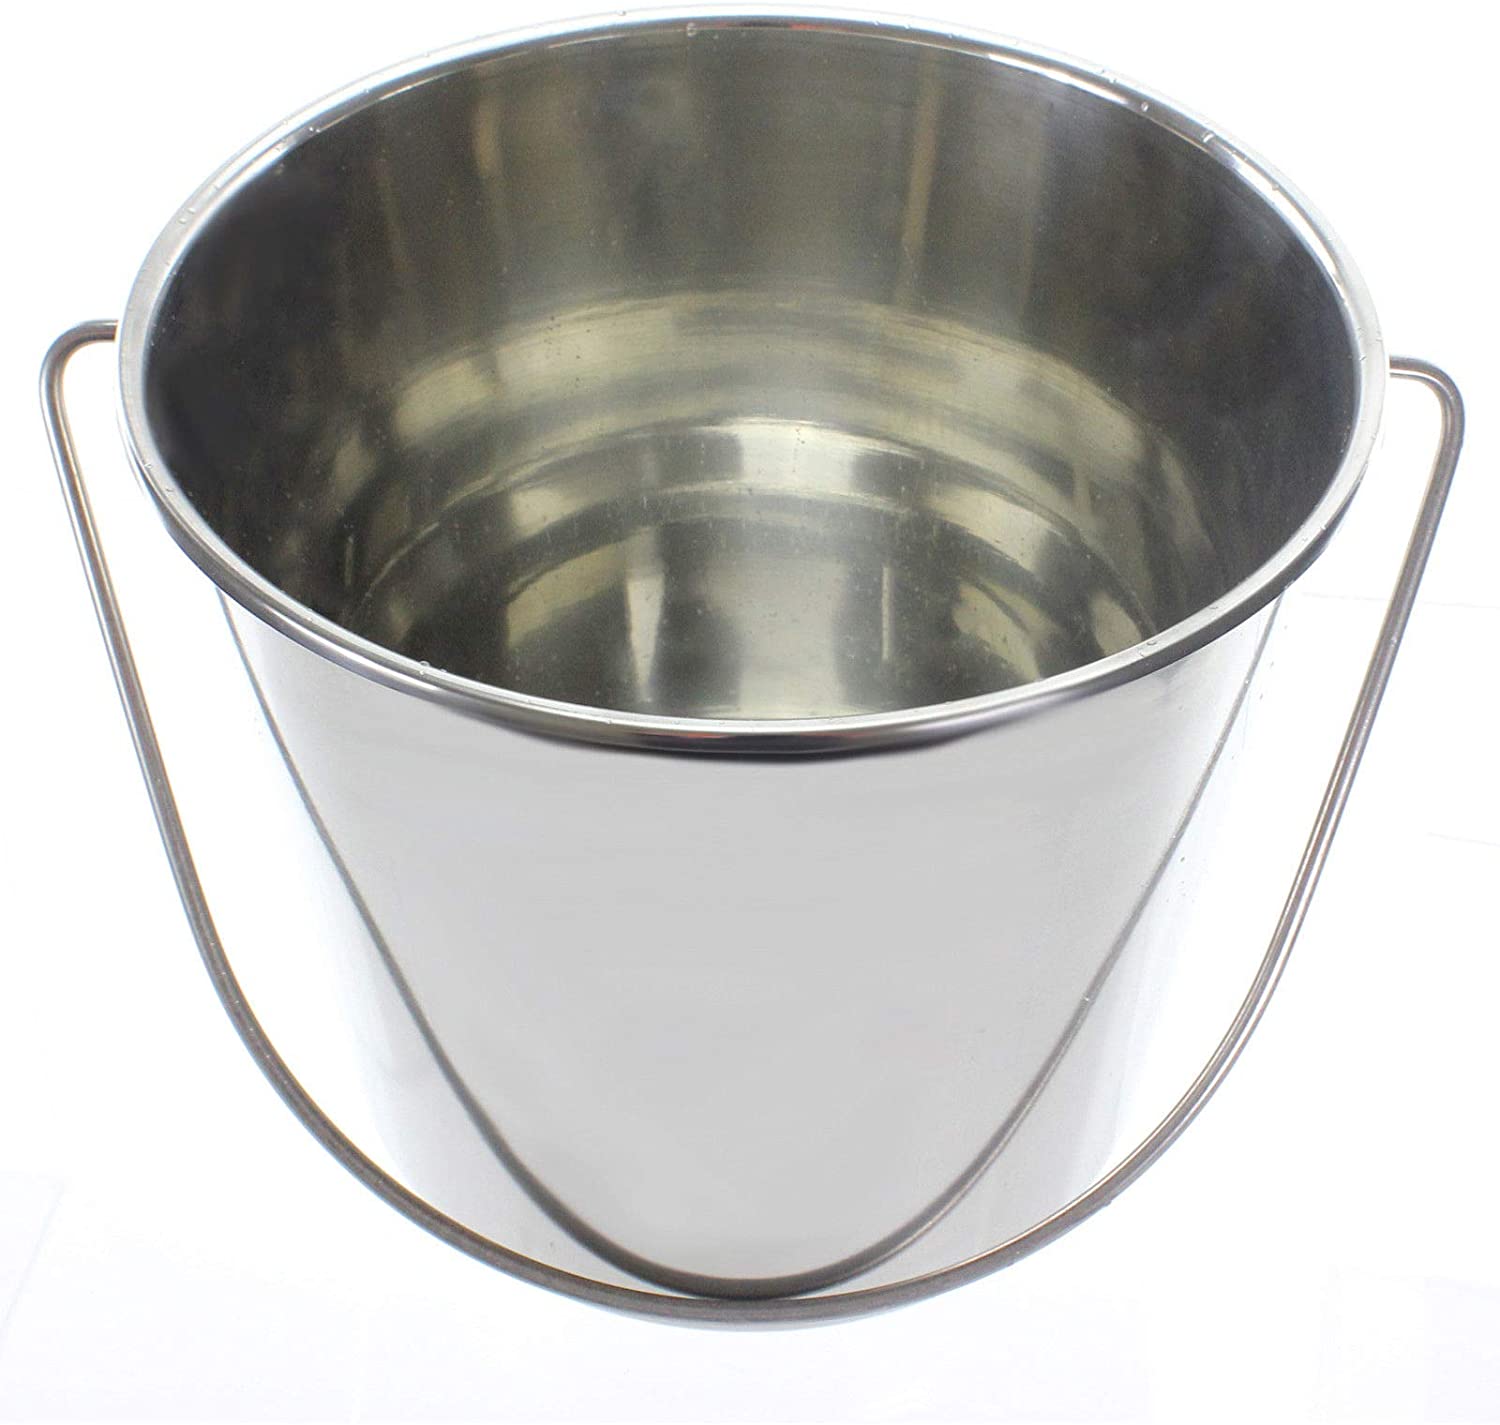 12 Litre Feed Feeding Watering Bucket for Horse Equestrian Stable (Pack of 2)